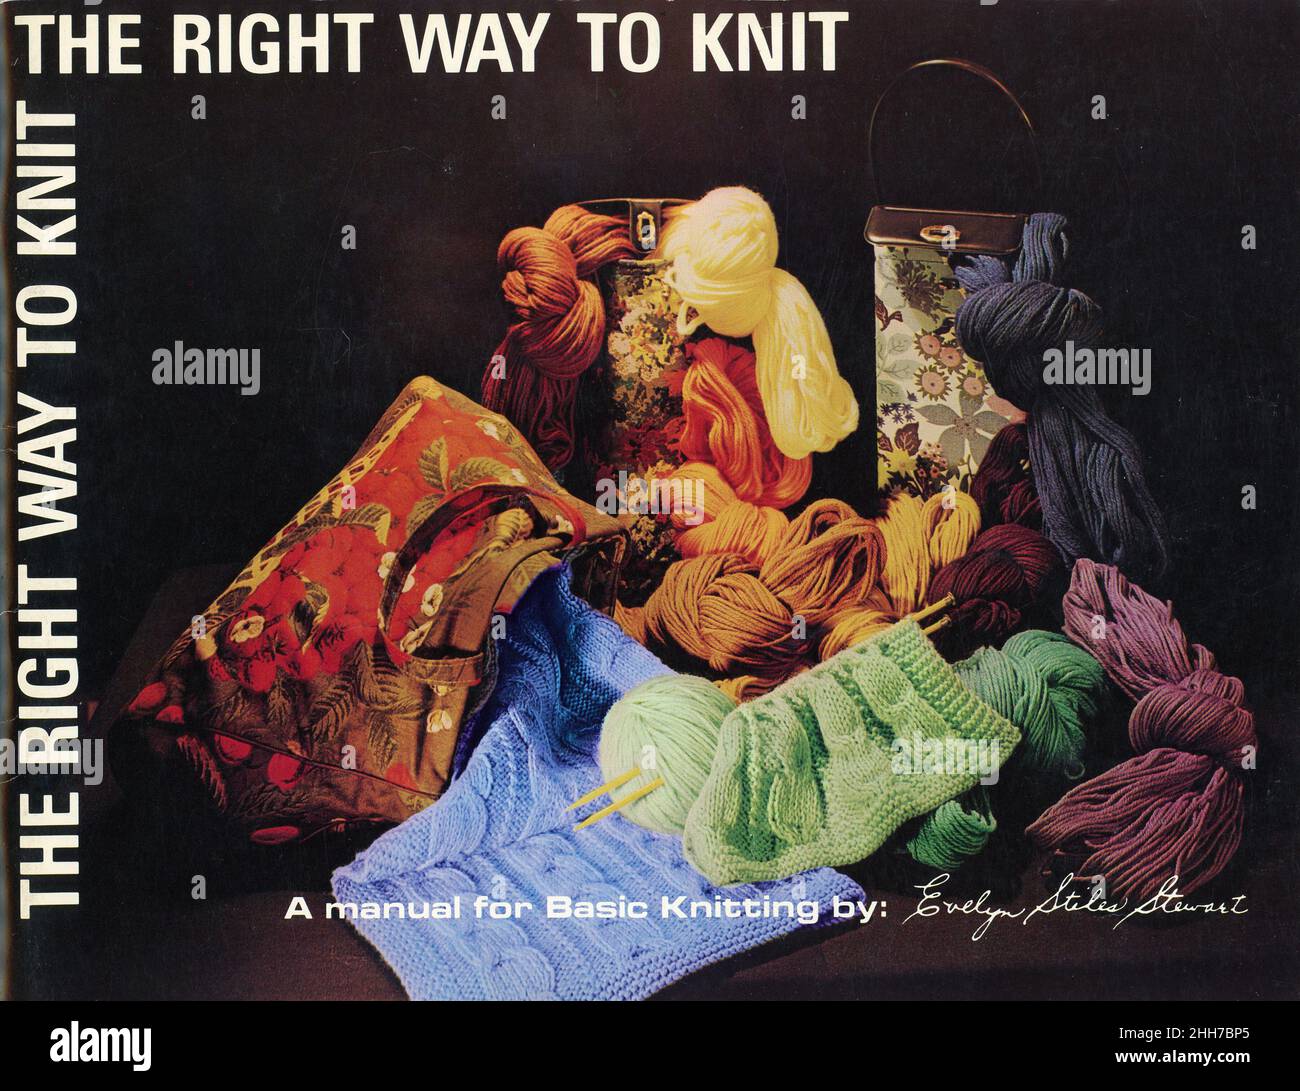 Vintage 'The Right Way to Knit' Anleitung, USA 1967 Stockfoto